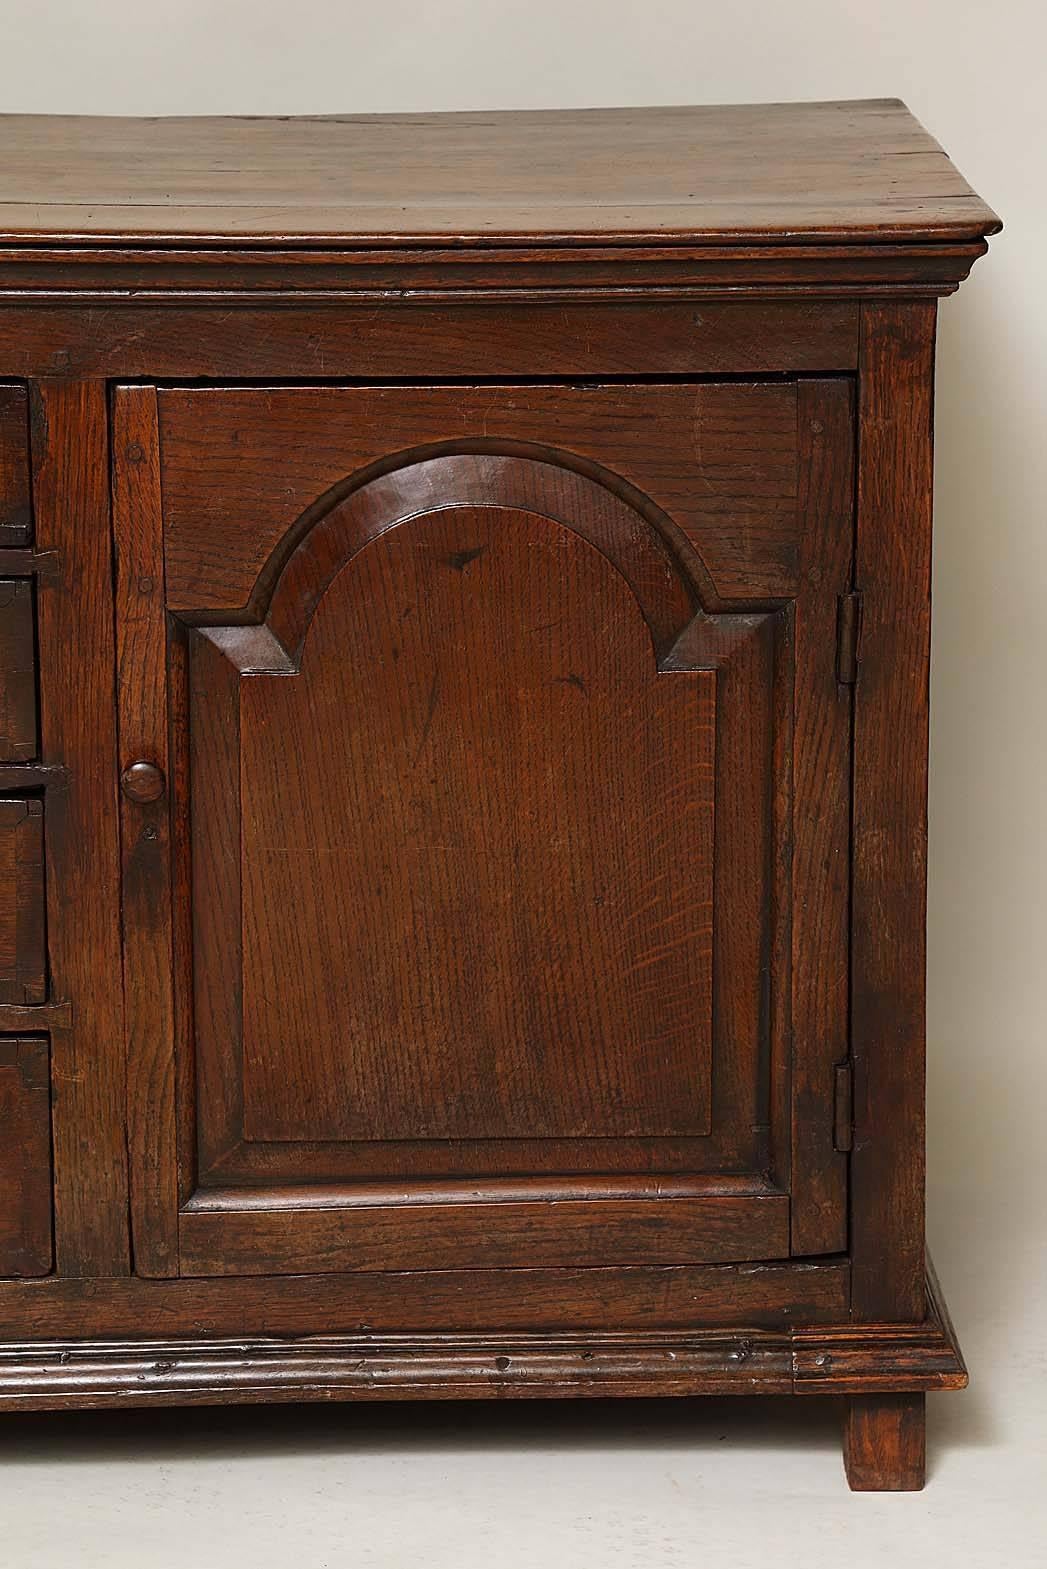 18th century Welsh oak cabinet form low dresser, the molded top over two tombstone panel doors flanking flight of four graduated drawers having mahogany banding, standing on molded base supported by original stile feet, the whole with good rich